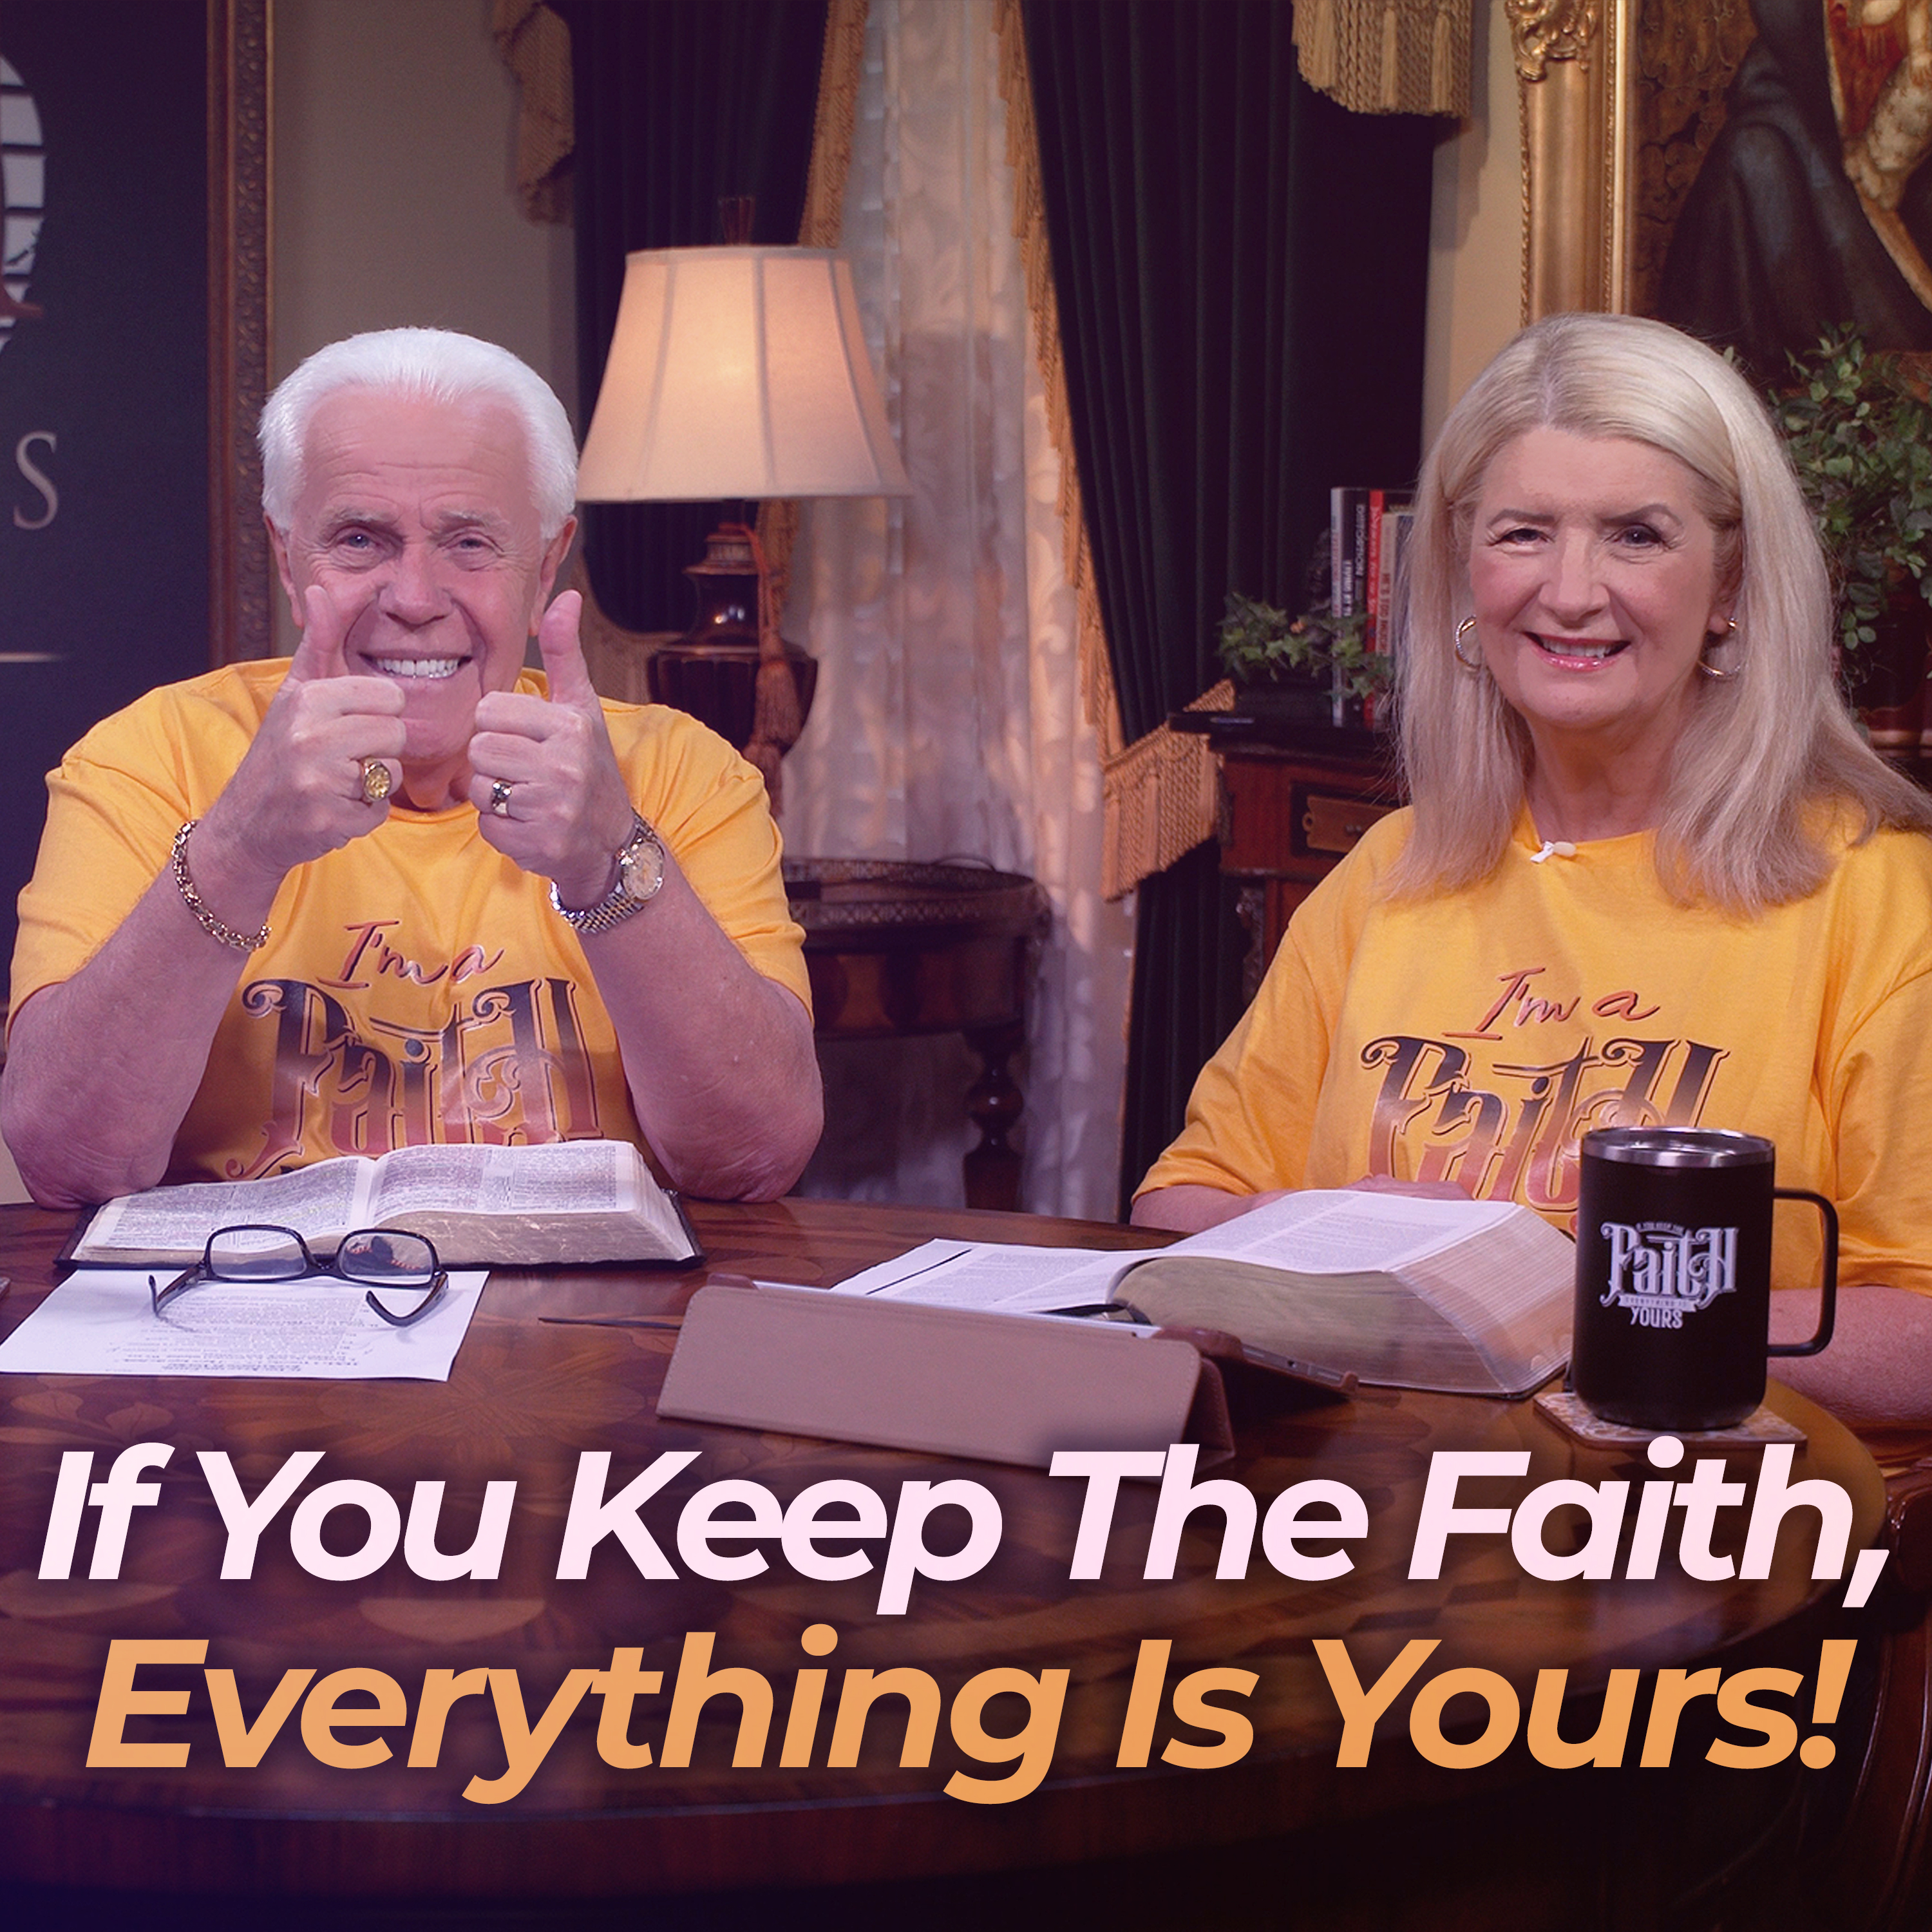 If You Keep The Faith, Everything Is Yours!